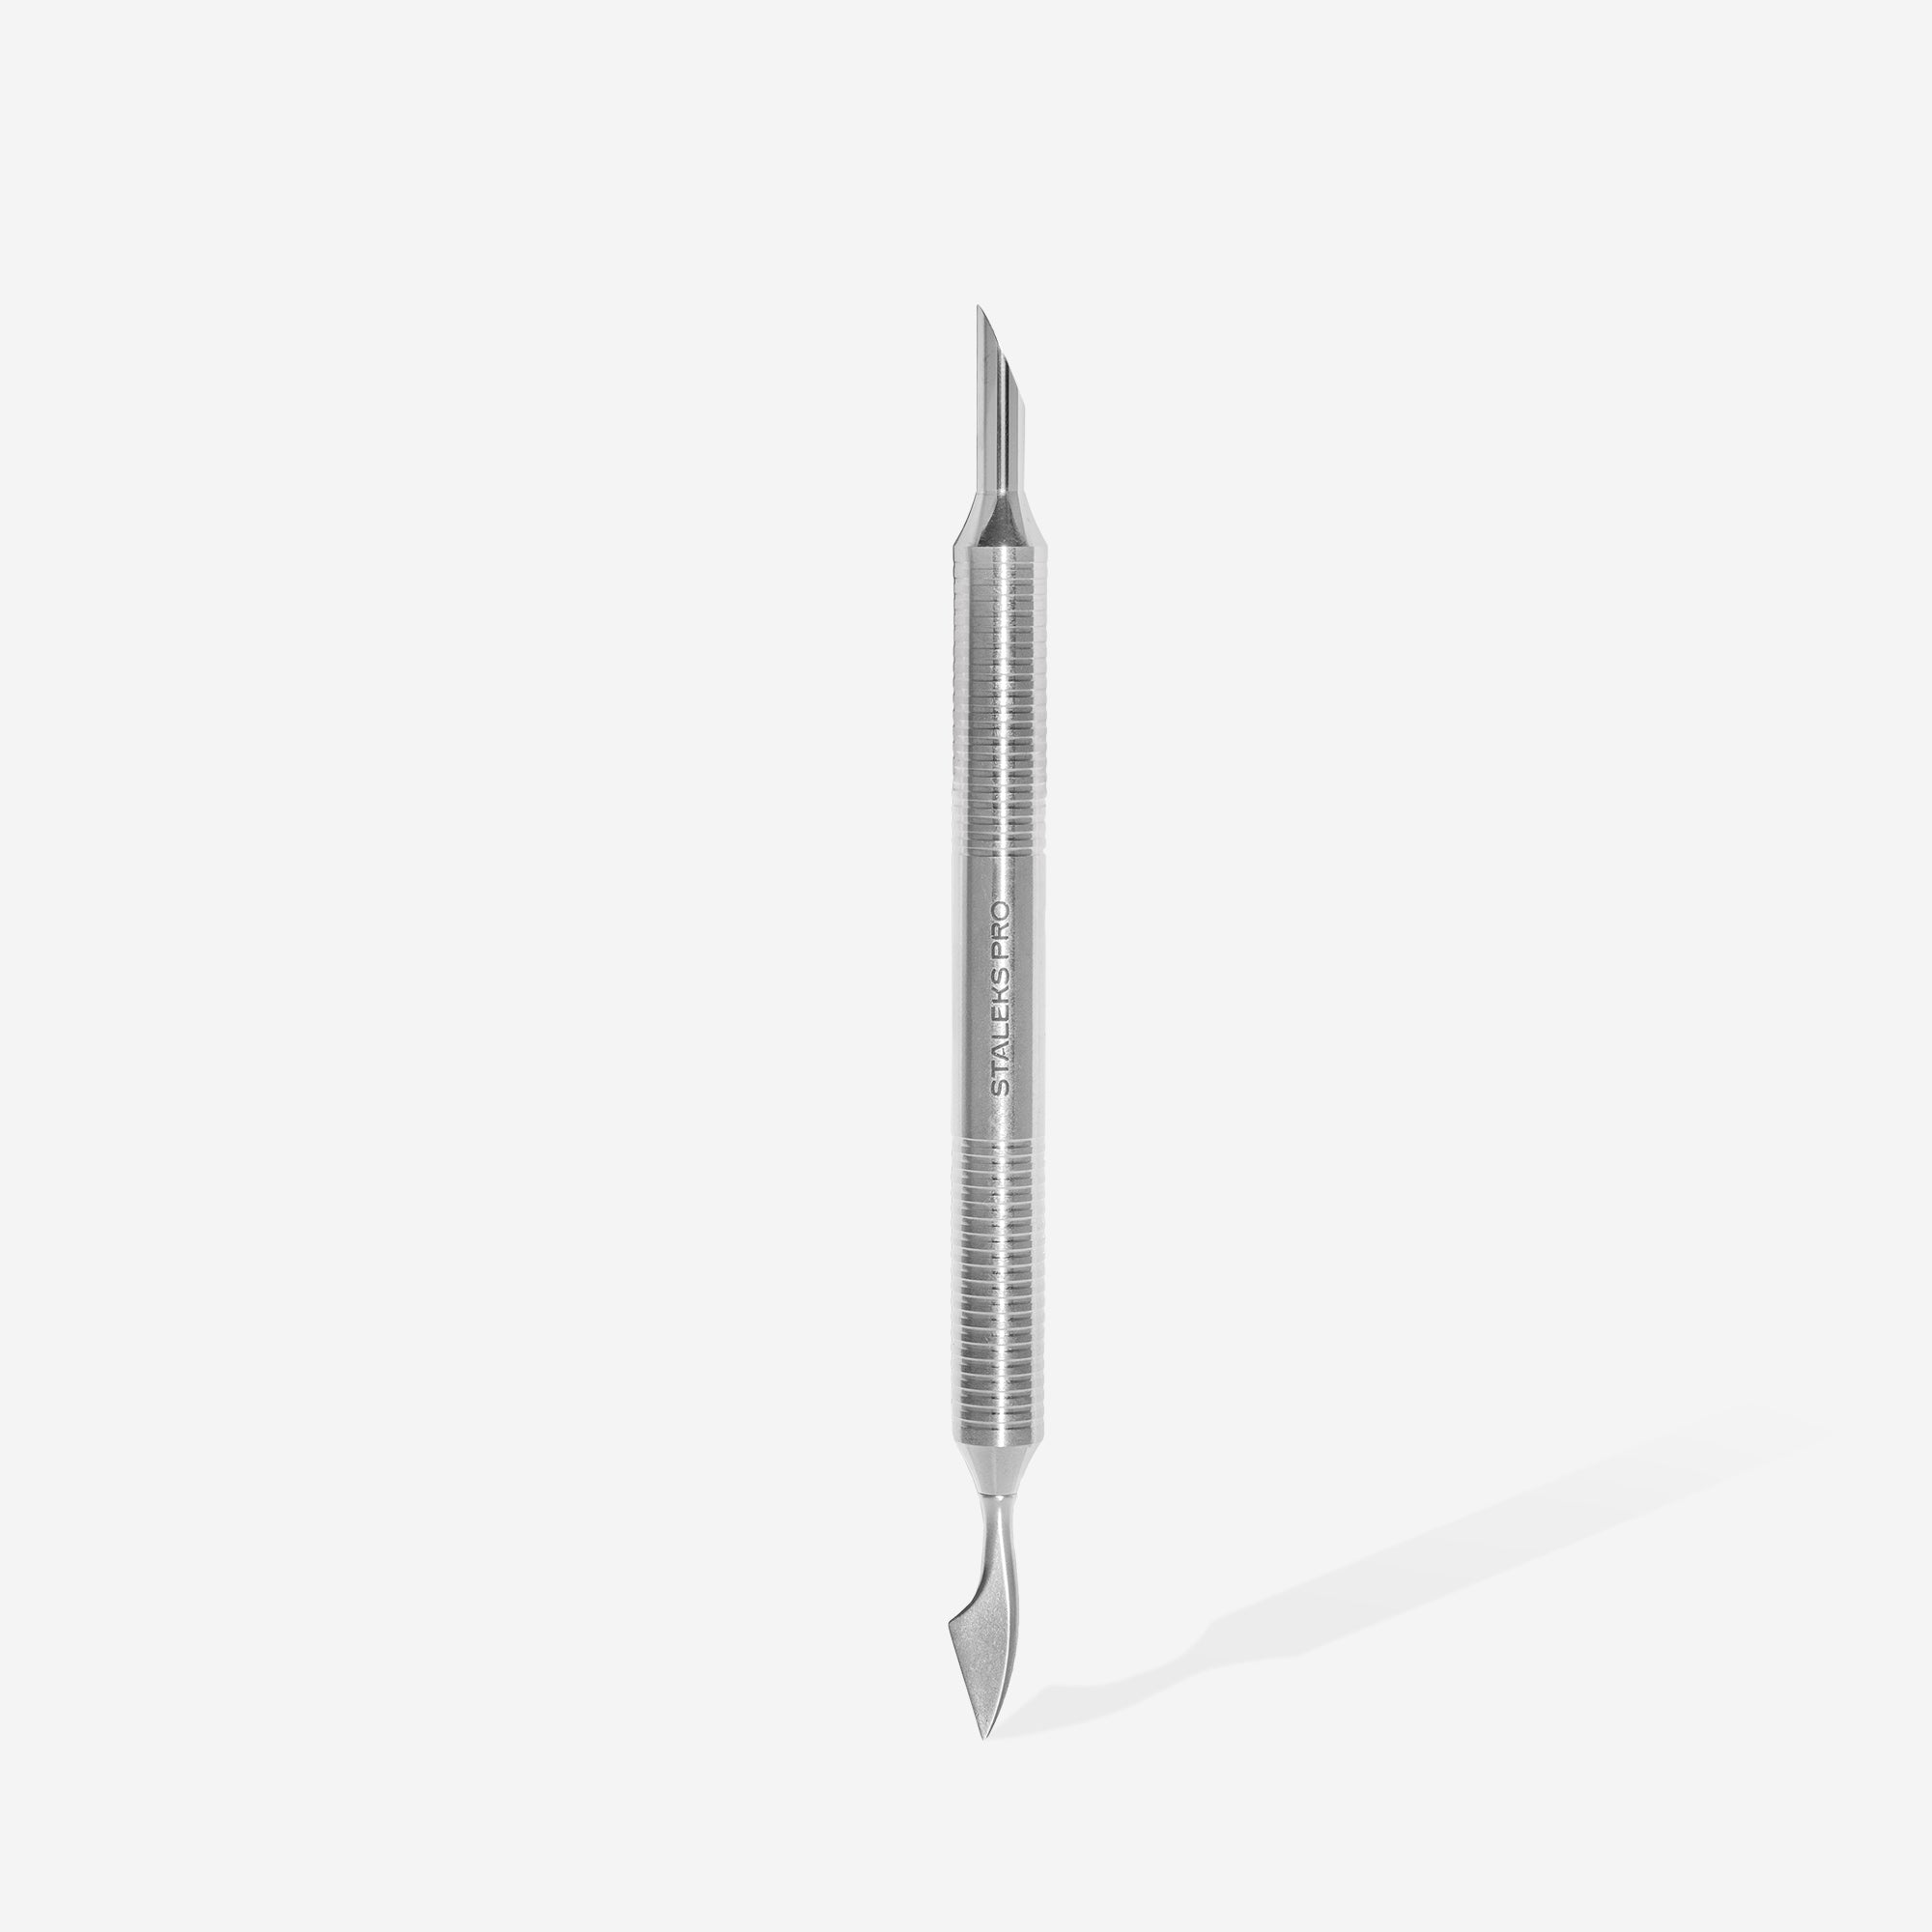 Hollow manicure pusher EXPERT 100 TYPE 1 (slanted pusher and cleaner)